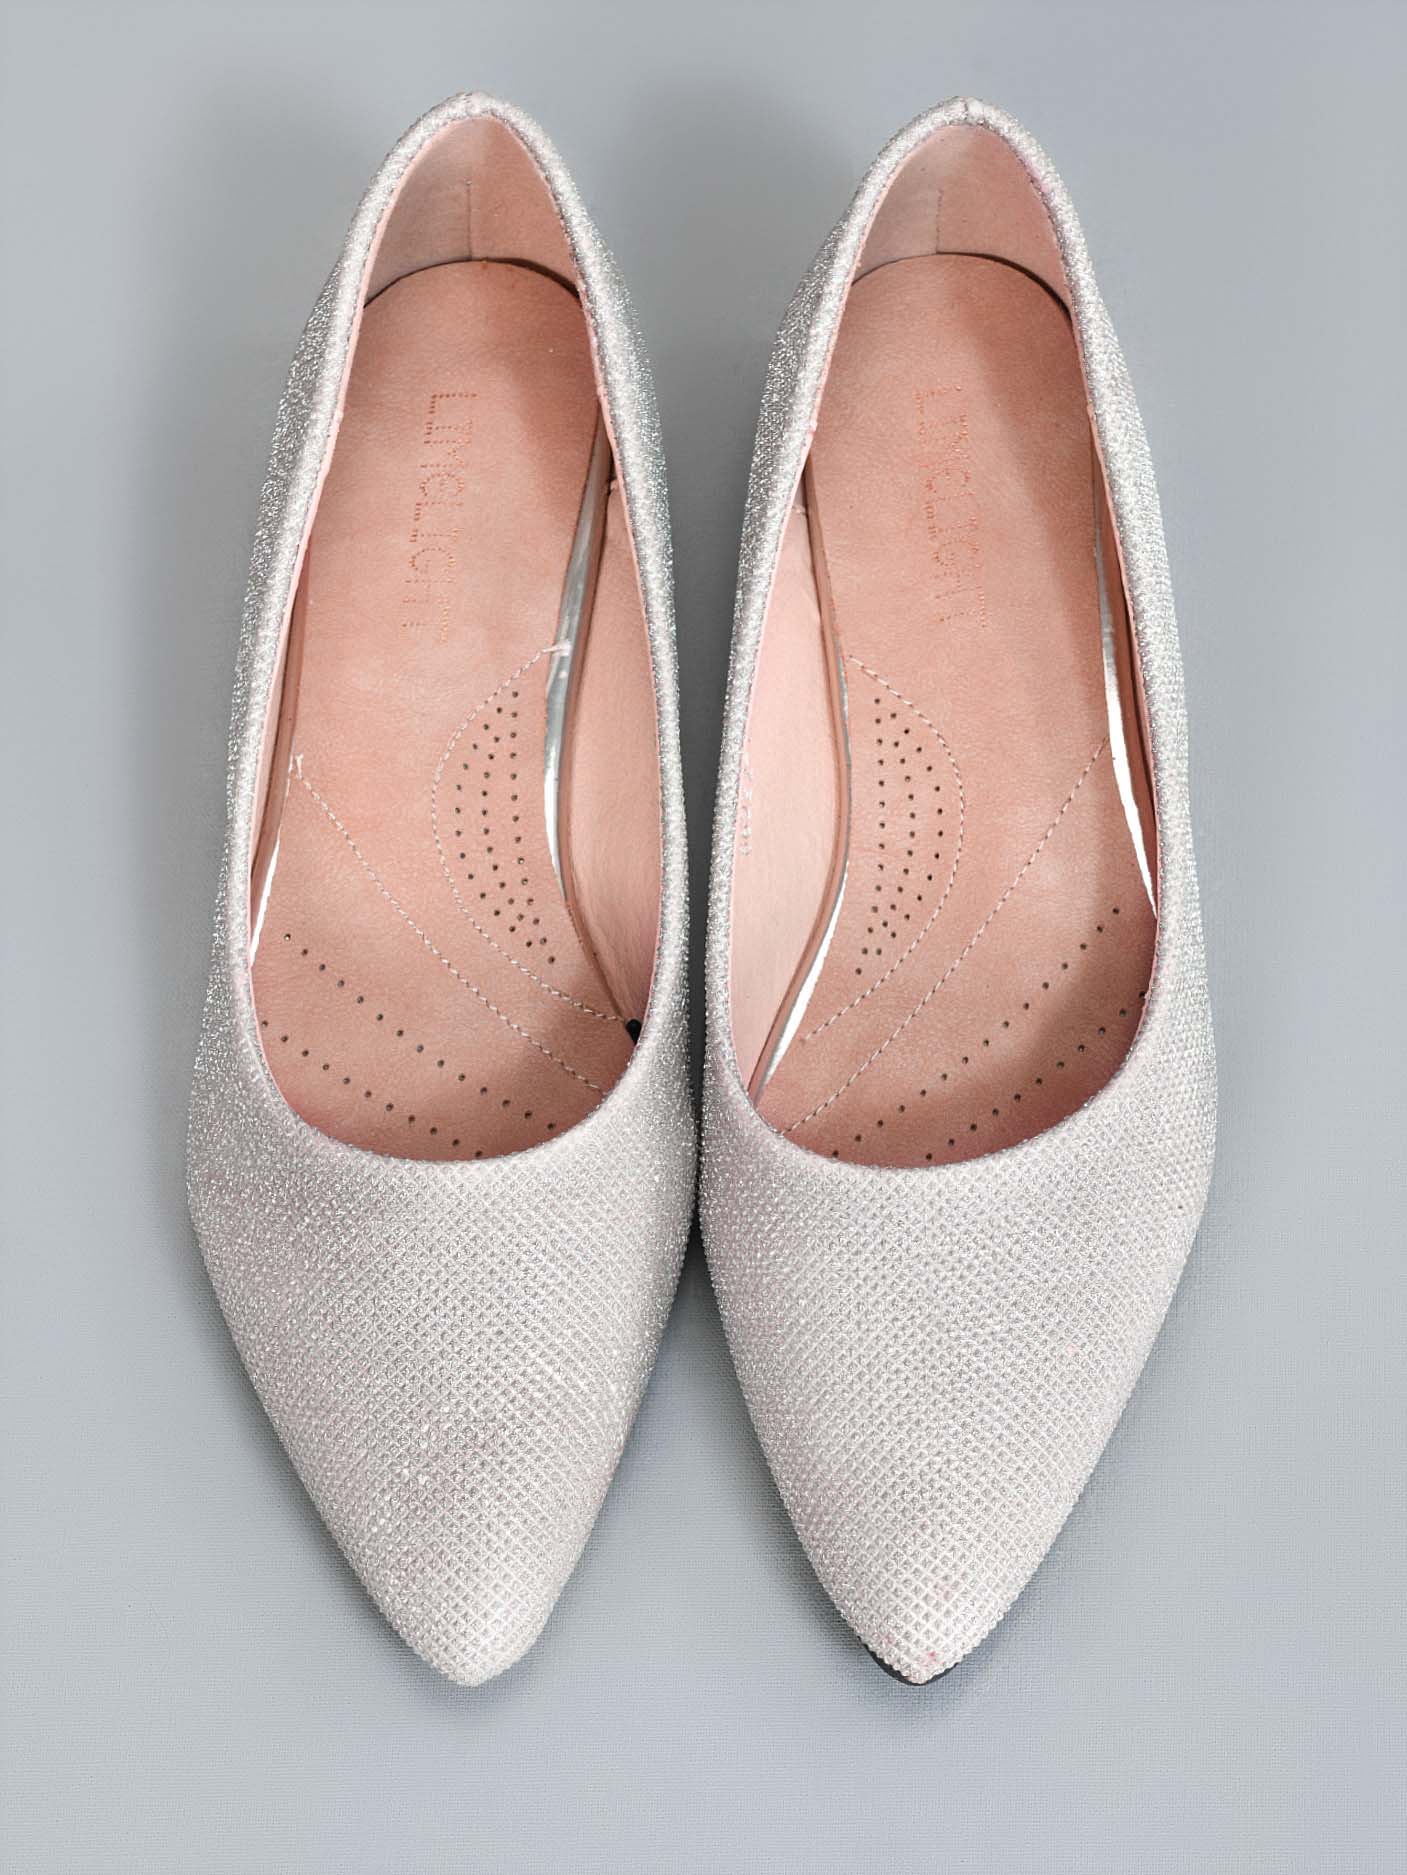 Shimmery Pointed Pumps - Beige